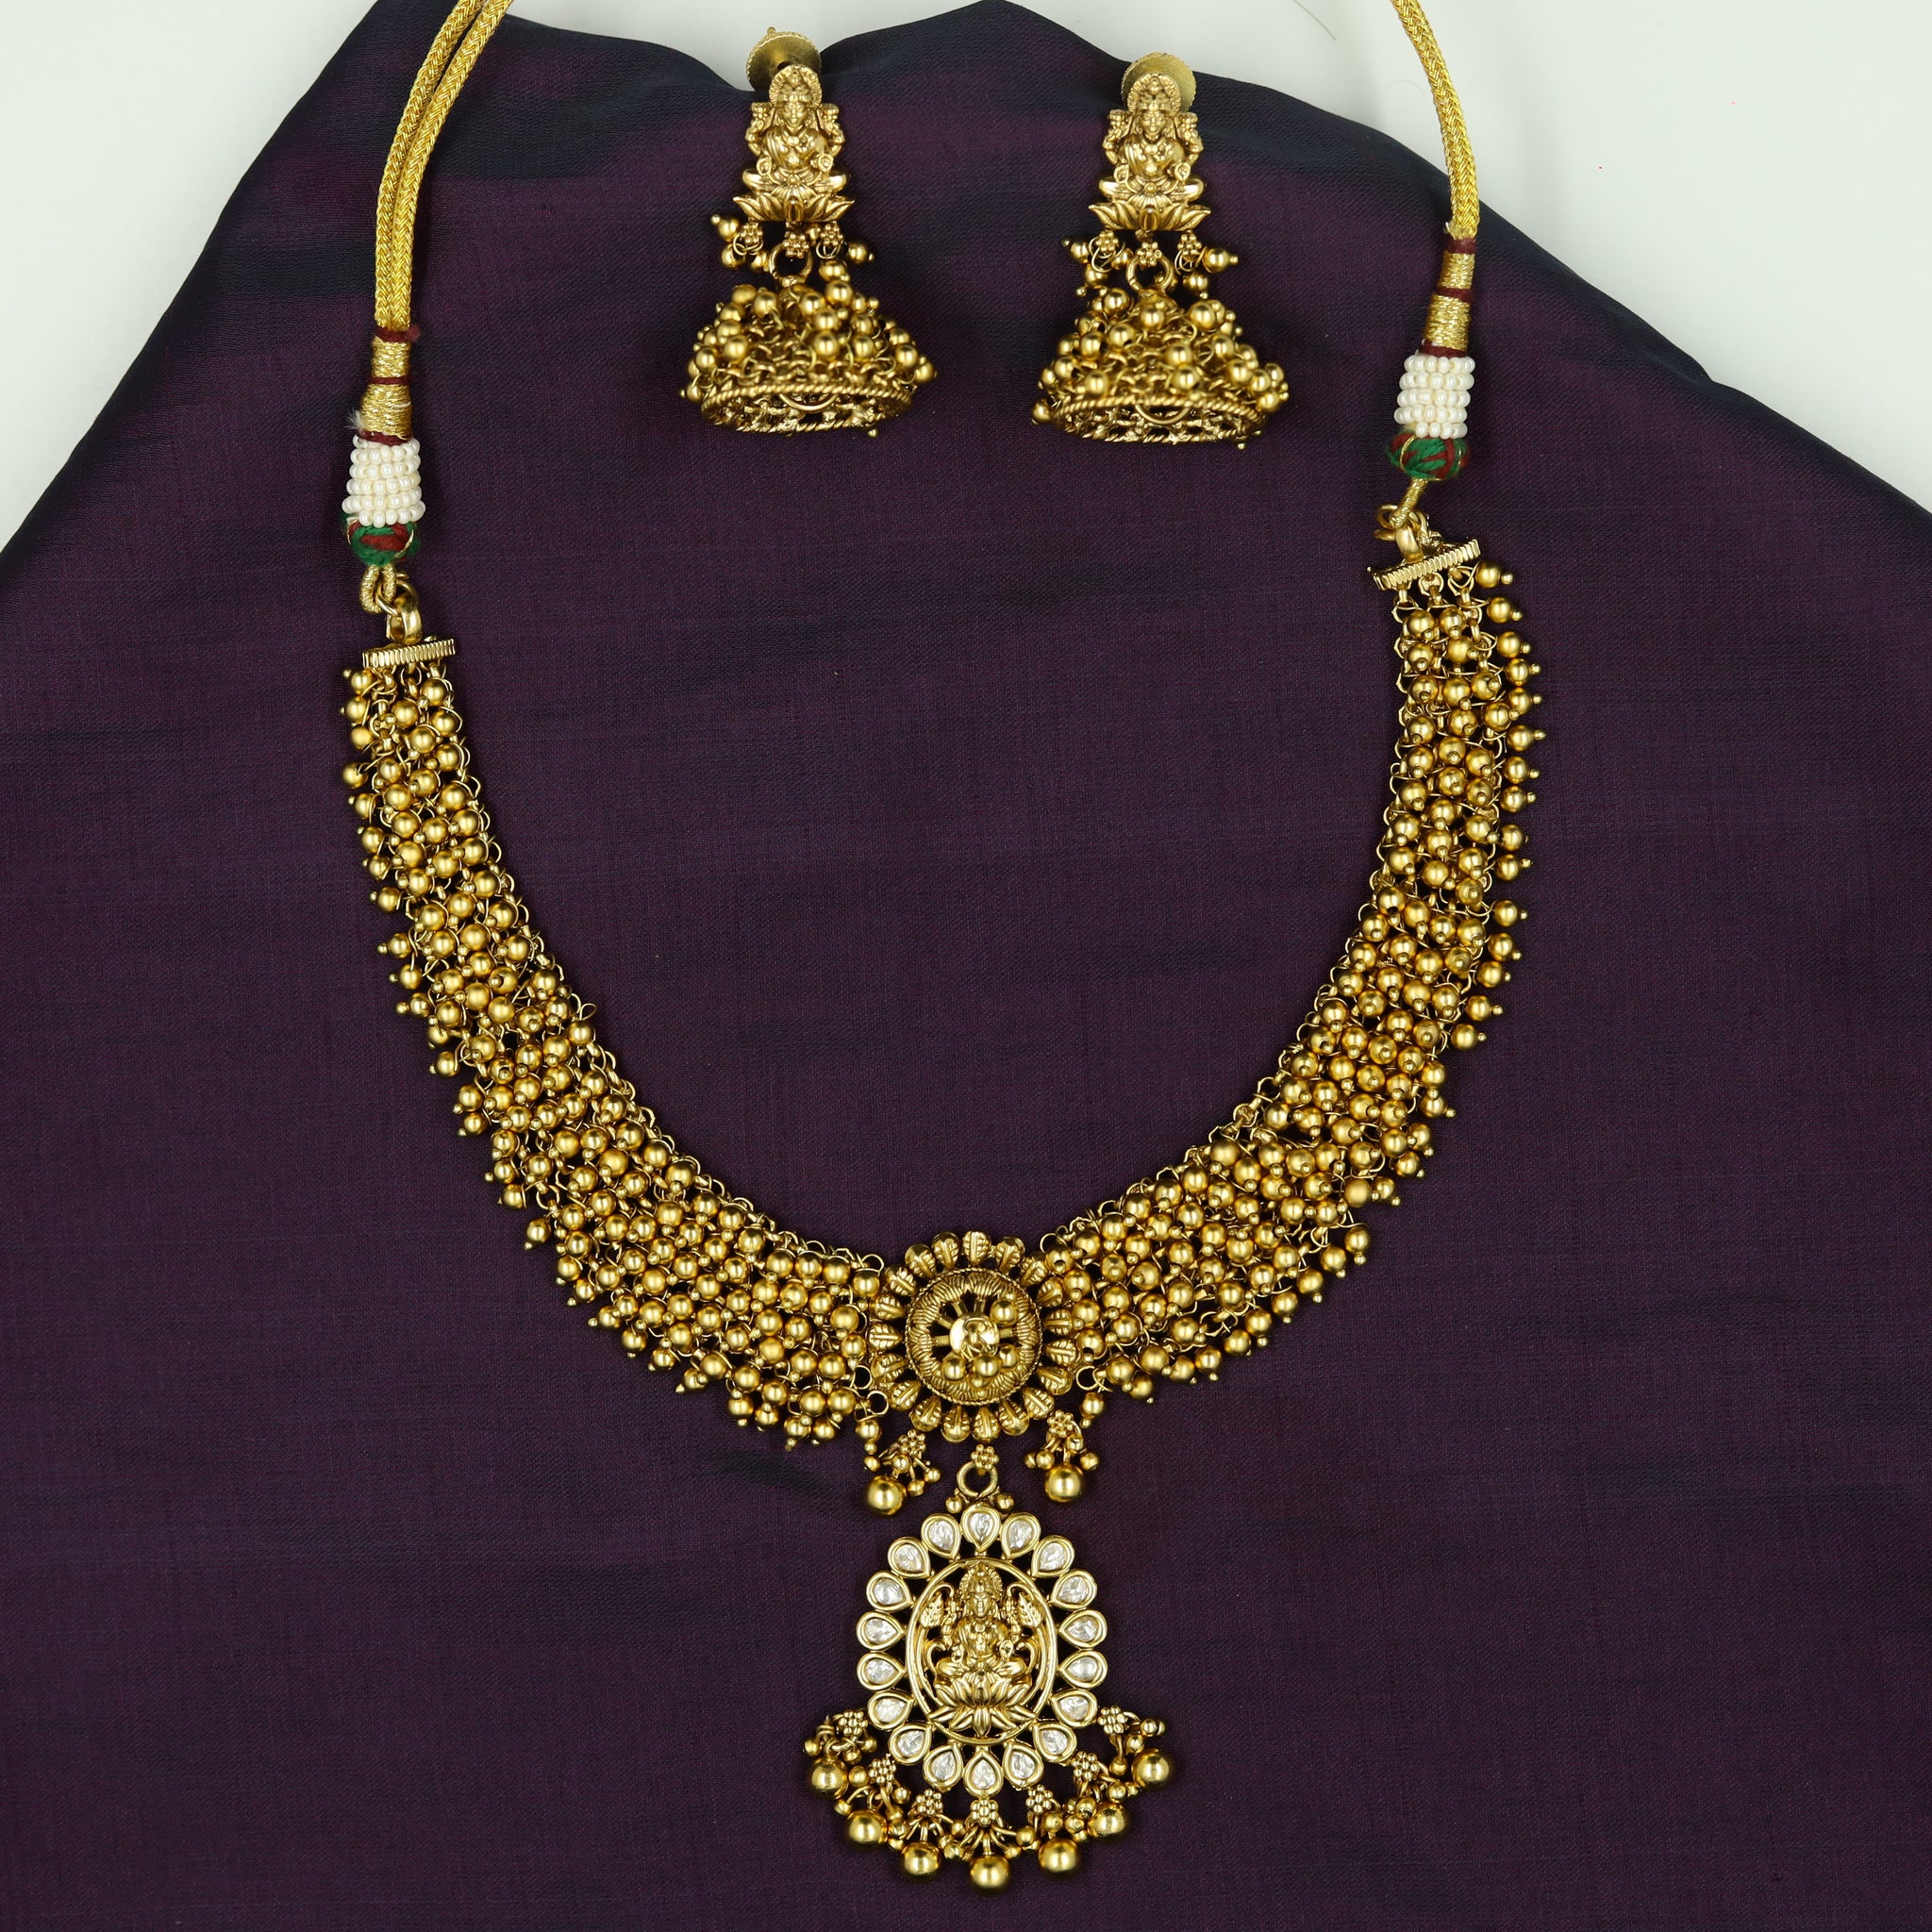 Antique Gold Plated Round Neck Temple Necklace Set 10052-28